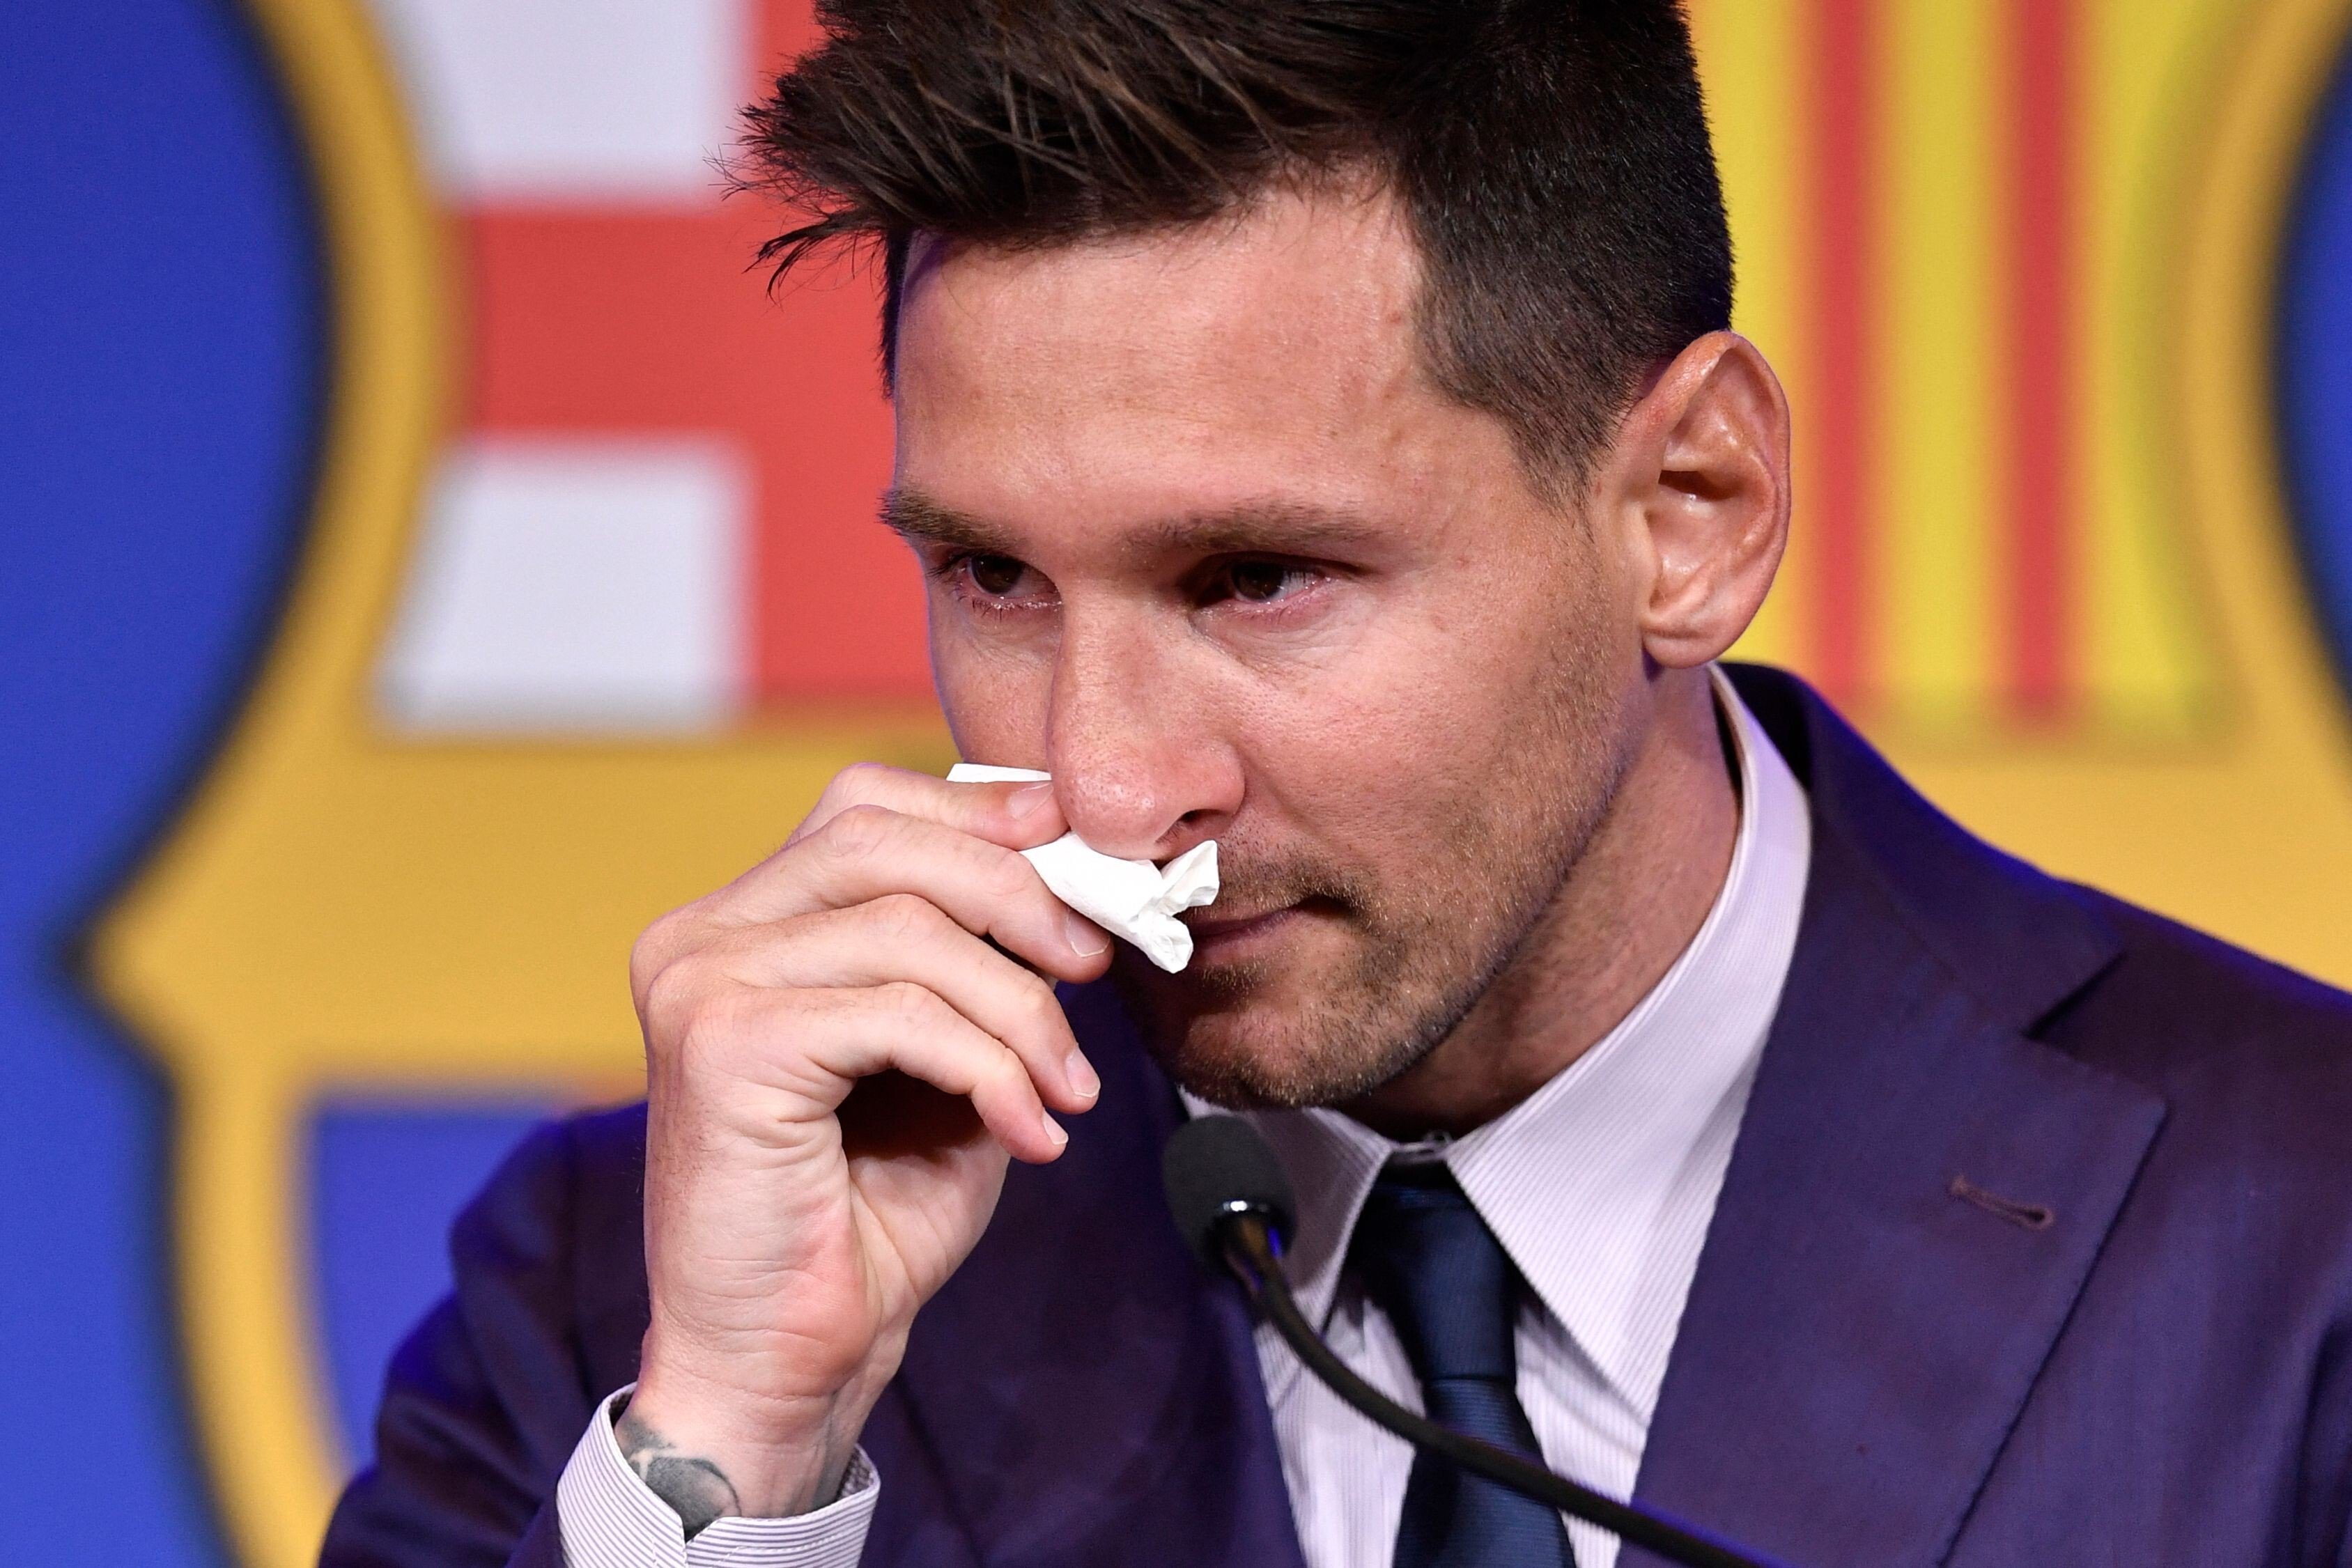 Lionel Messi arrives in tears to hold a press conference to announce his exit from Barcelona at the Camp Nou stadium. Photo: AFP